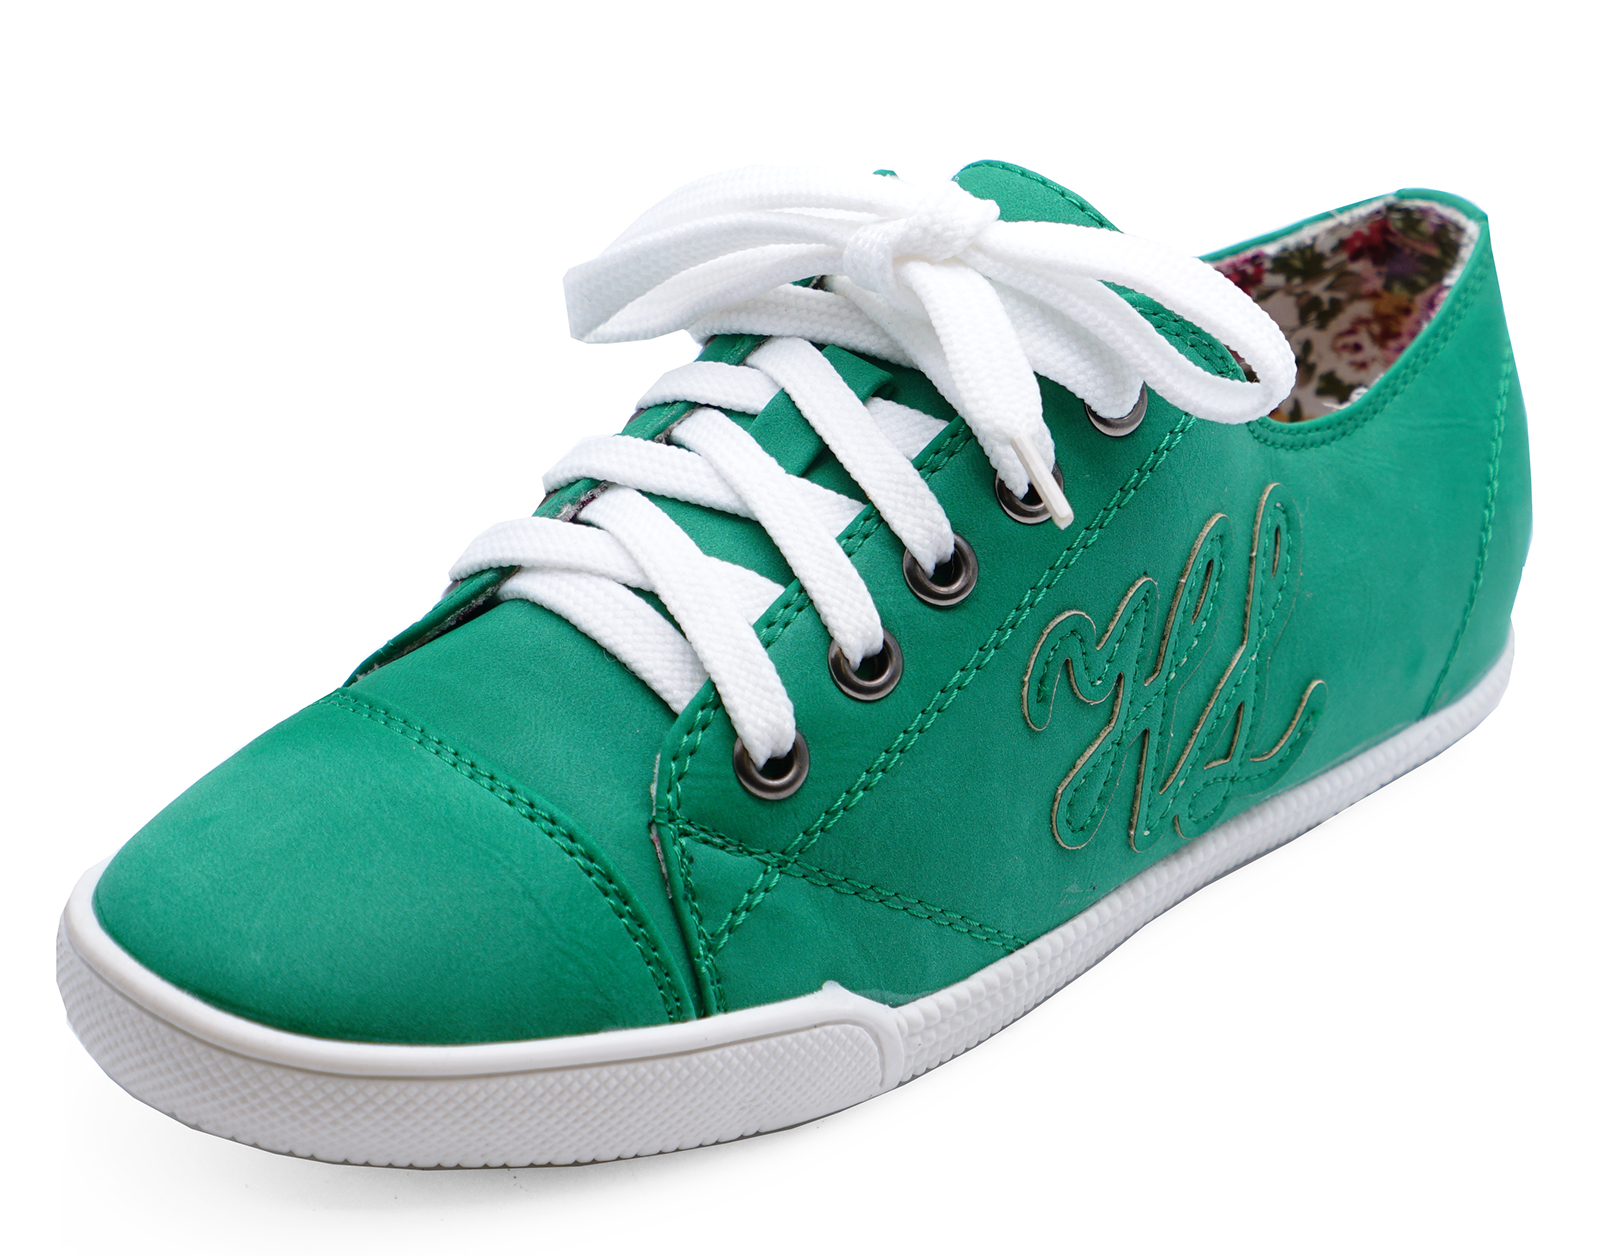 WOMENS GIRLS GREEN LACE-UP PLIMSOLL 